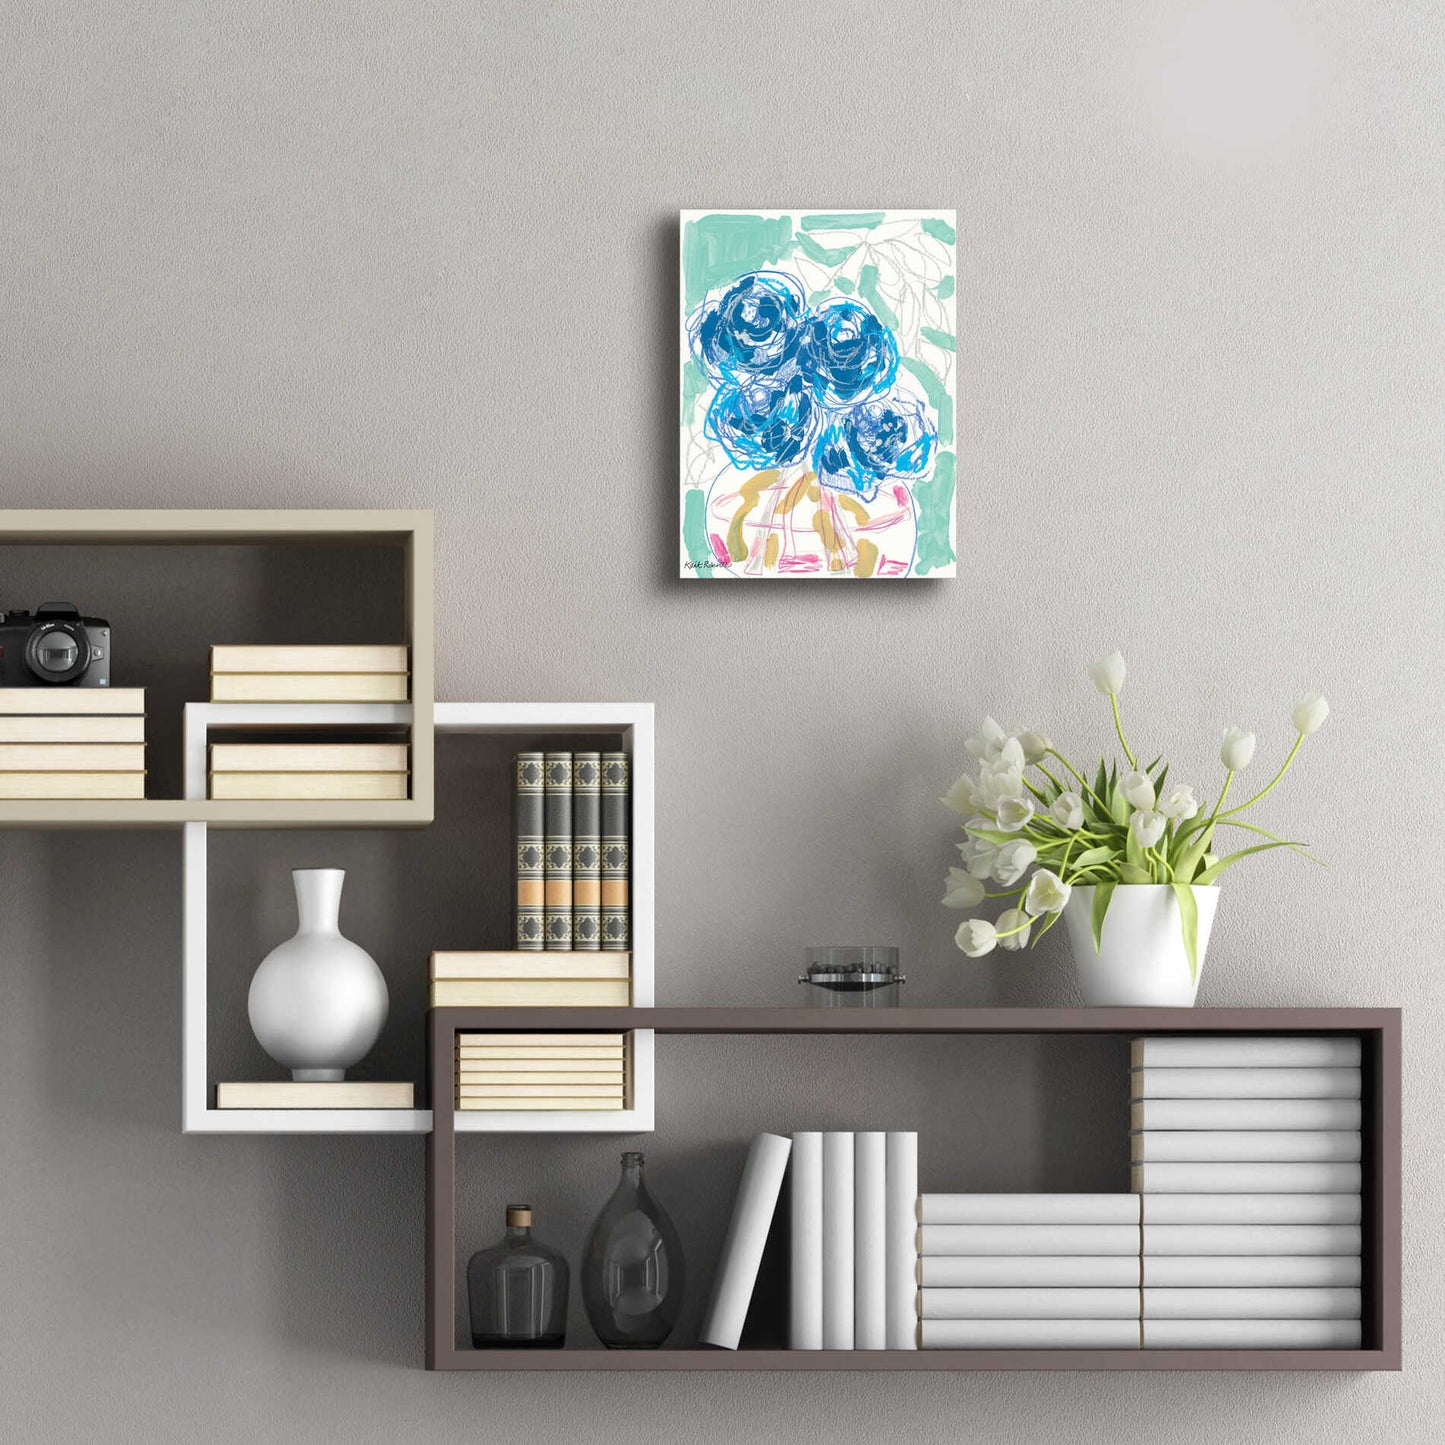 Epic Art 'Nightstand Blooms in Water' by Kait Roberts, Acrylic Glass Wall Art,12x16